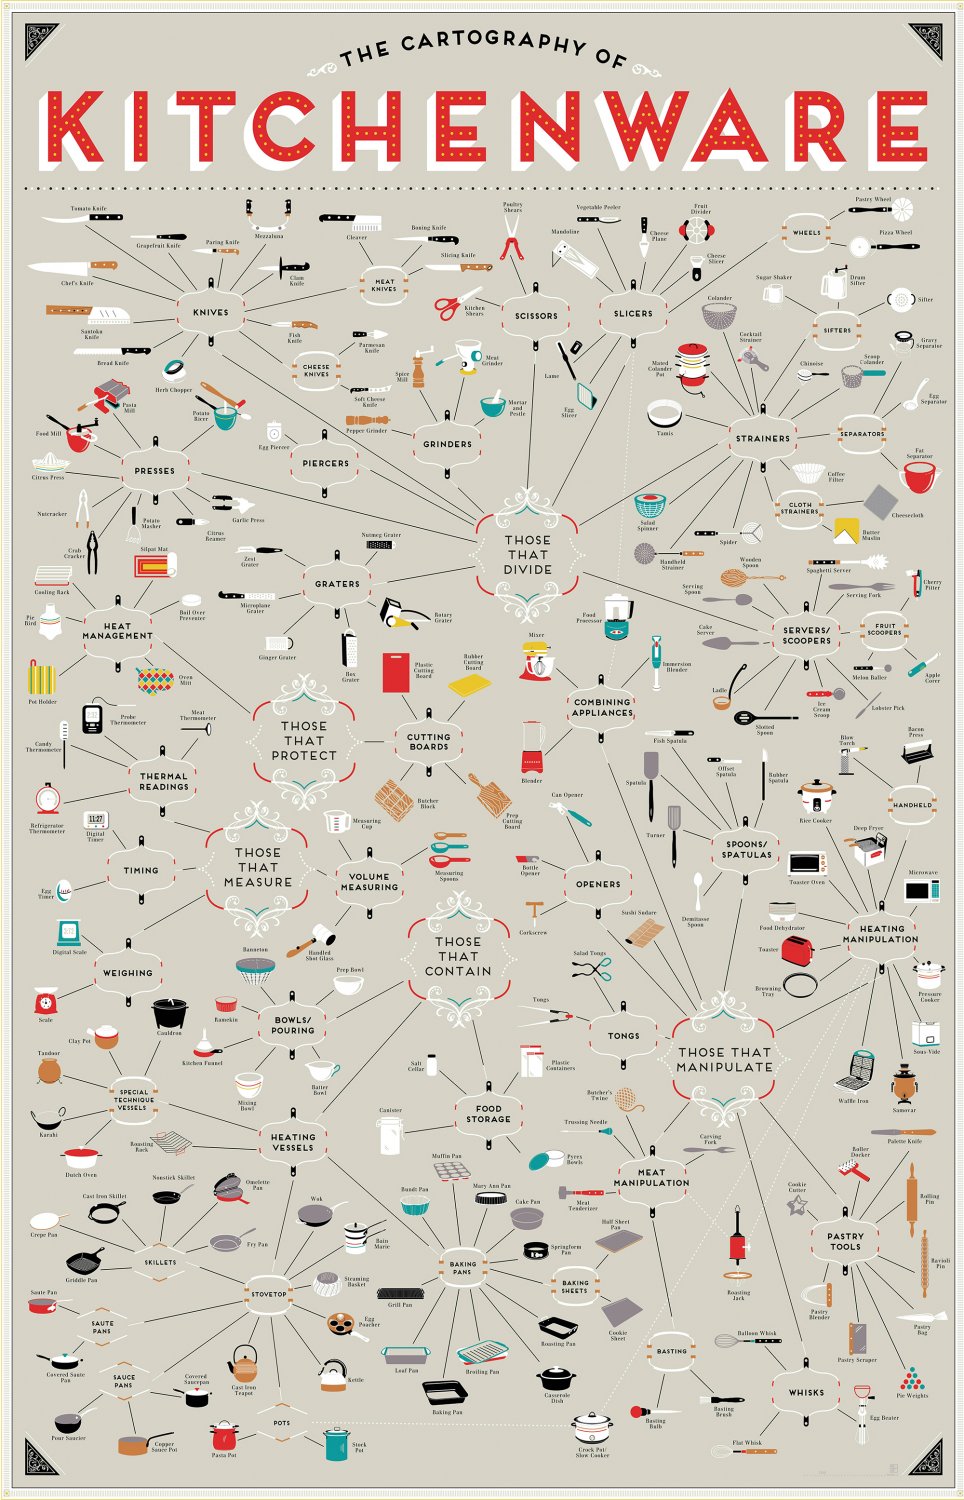 The Cartography of Kitchenware Chart 13"x19" (32cm/49cm) Polyester Fabric Poster